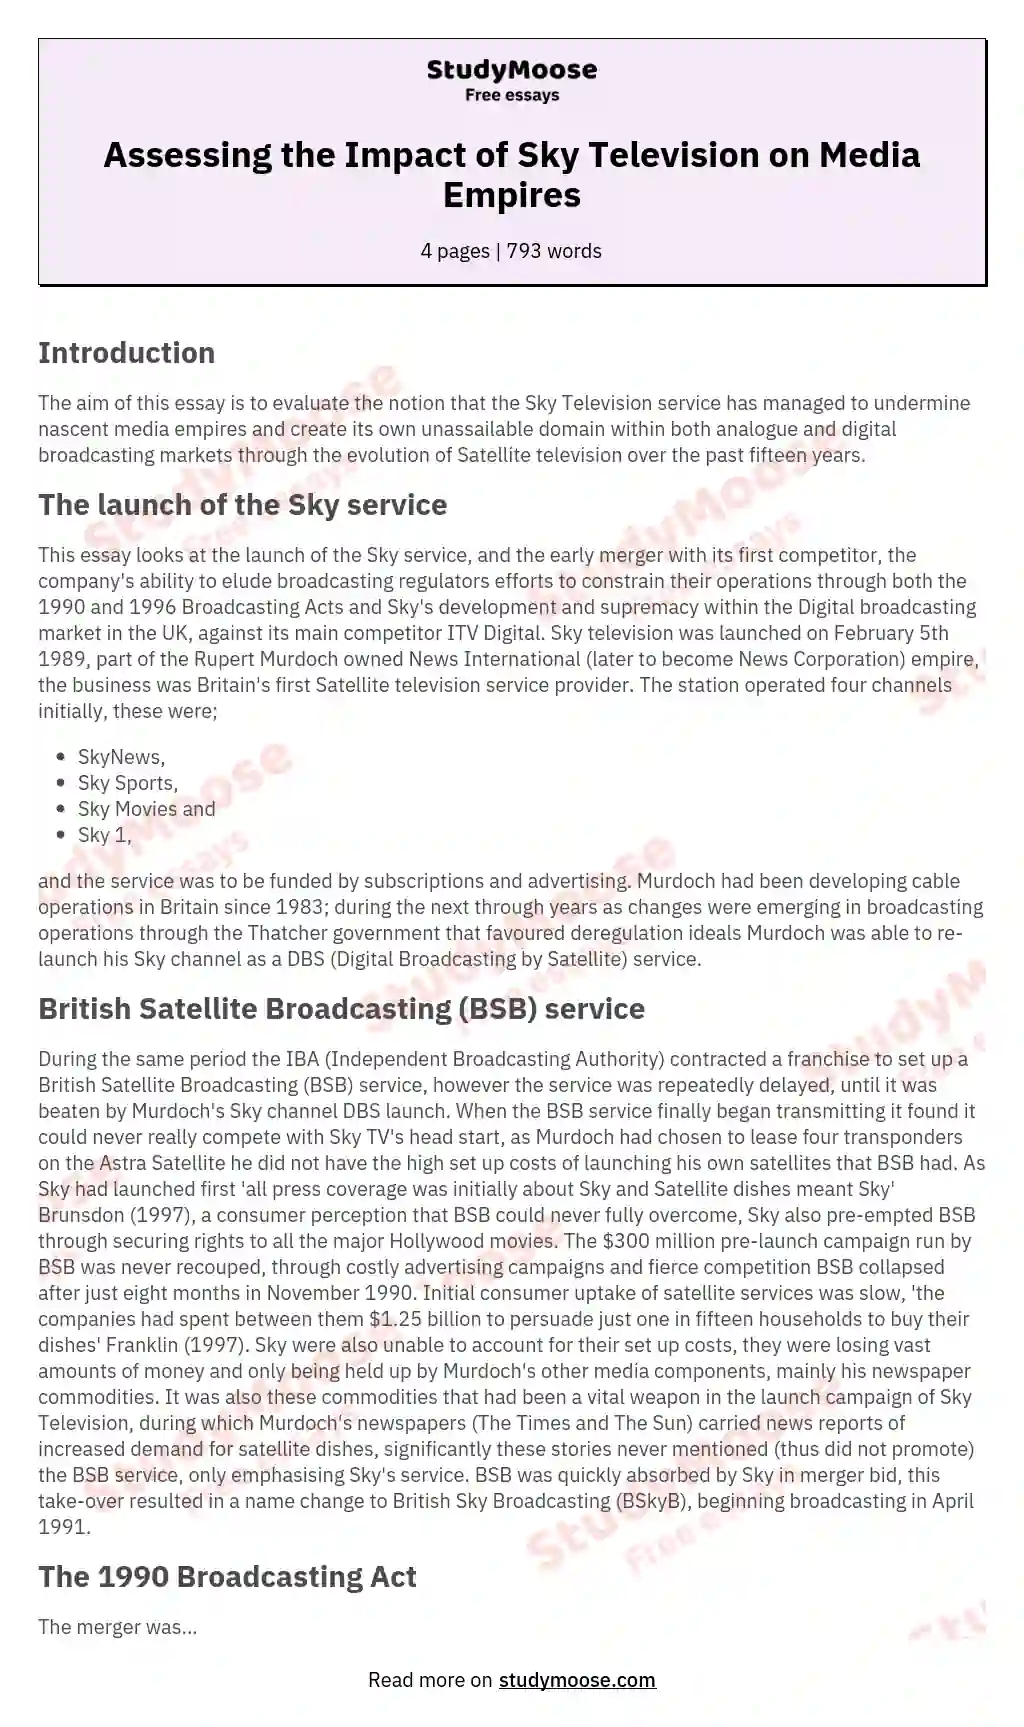 Assessing the Impact of Sky Television on Media Empires essay